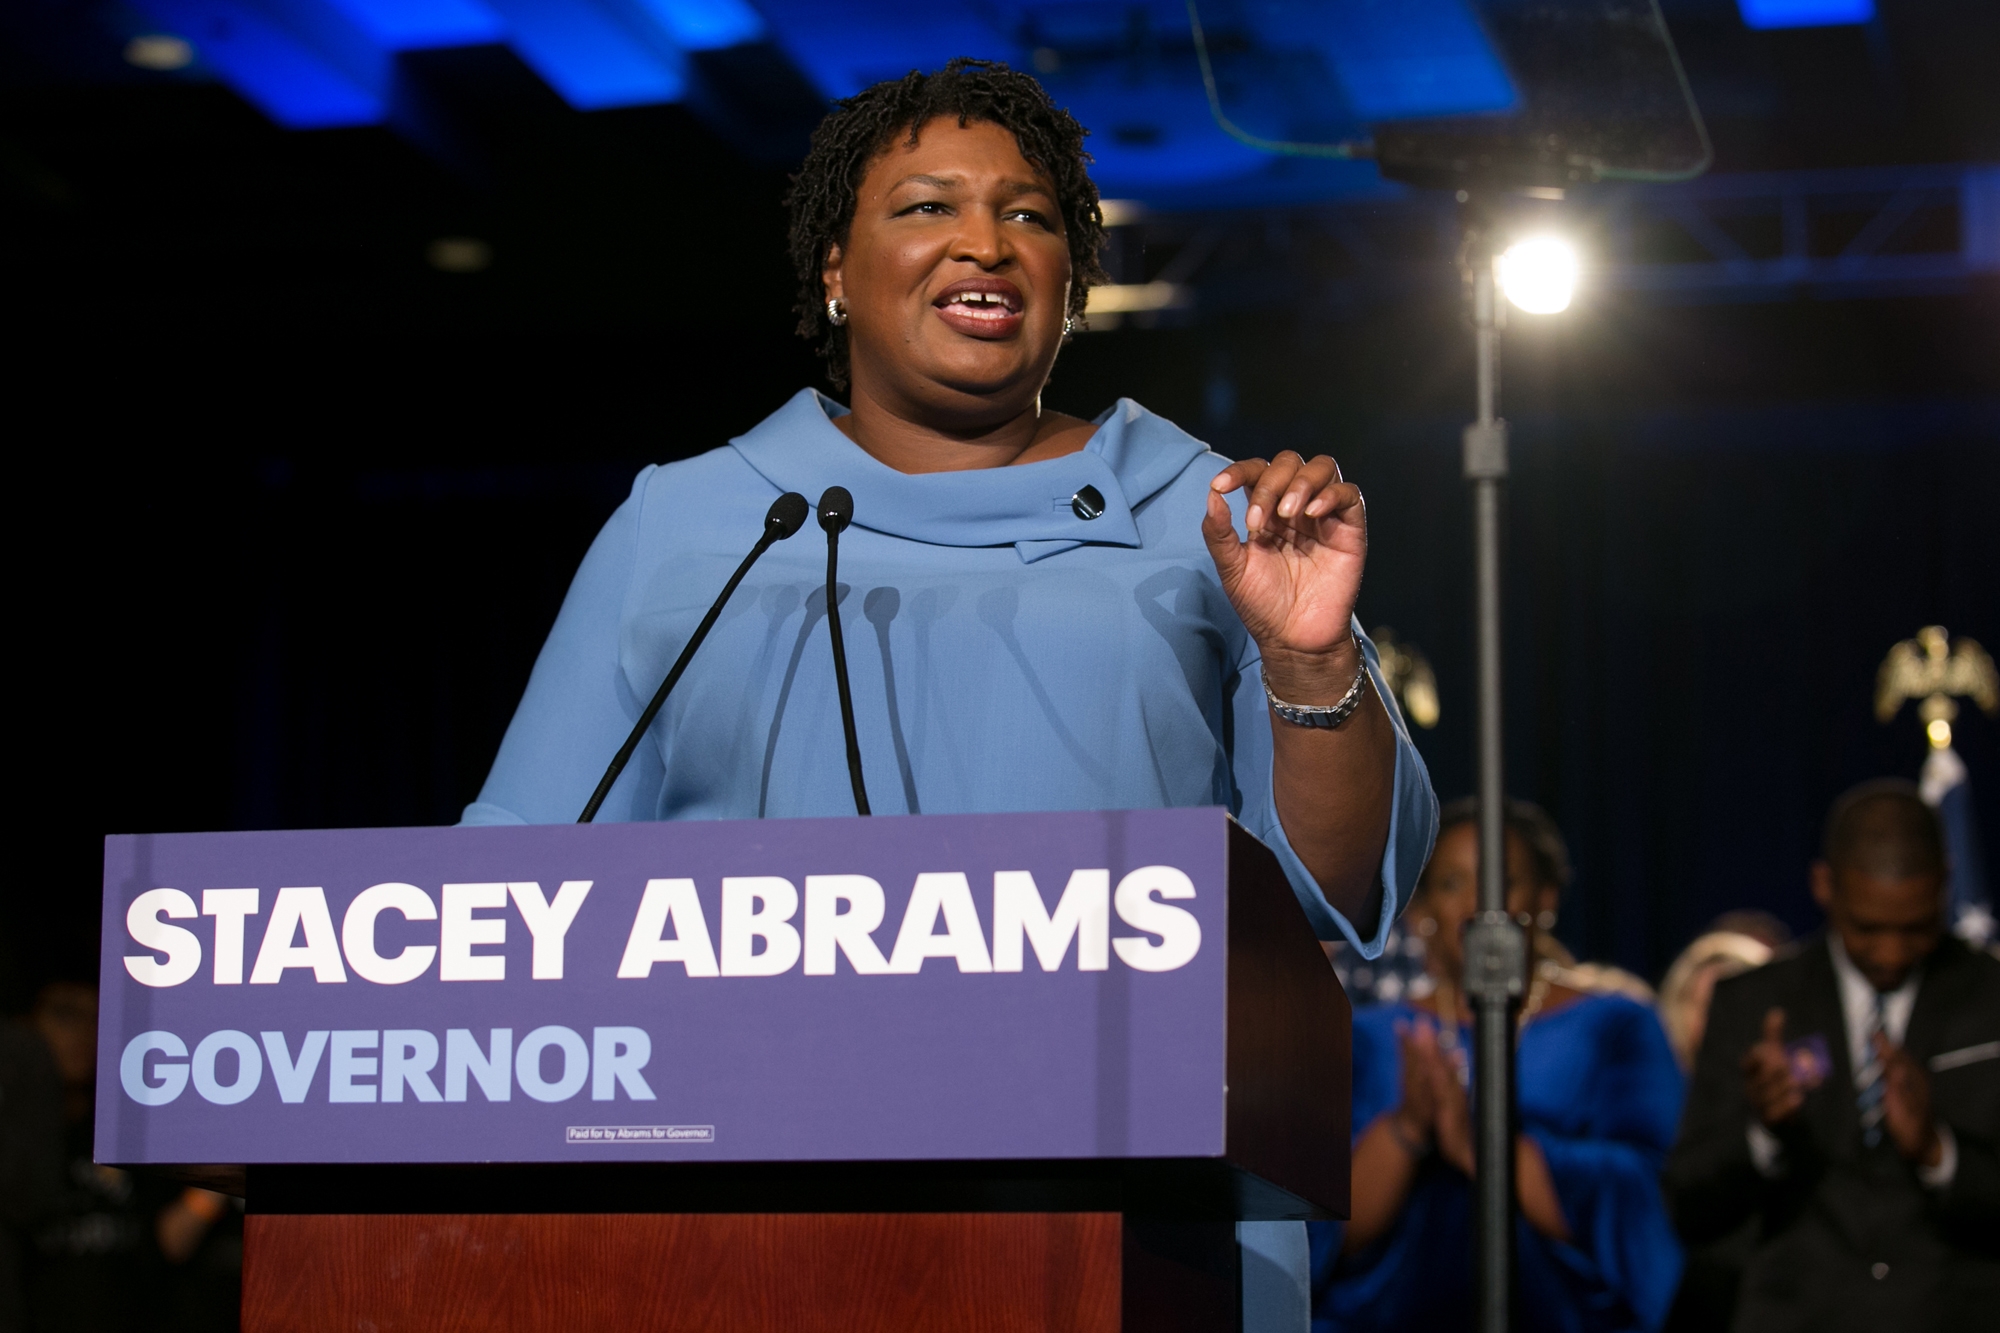 Stacey Abrams refuses to concede Georgia governor’s race, hoping for runoff